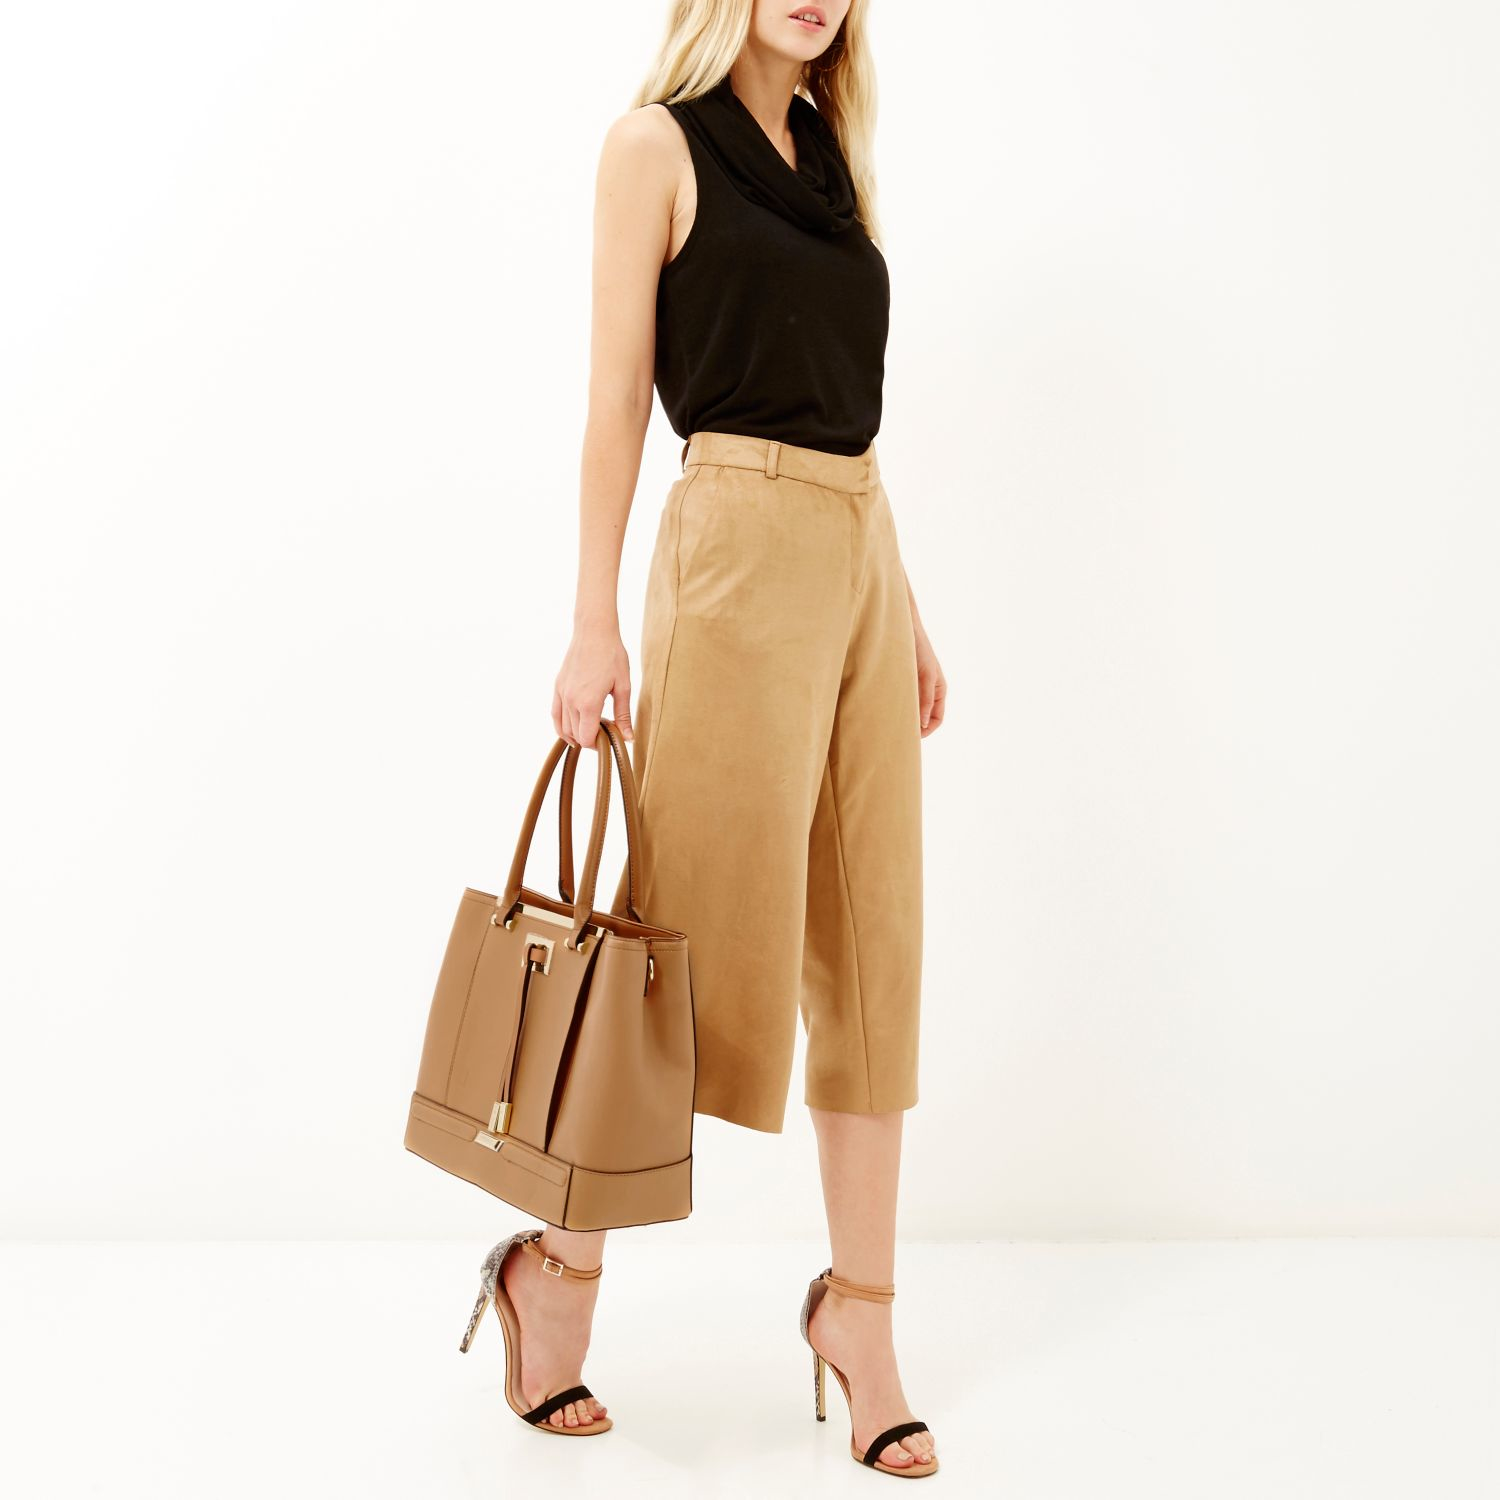 Lyst - River island Tan Brown Structured Tote Handbag in Natural